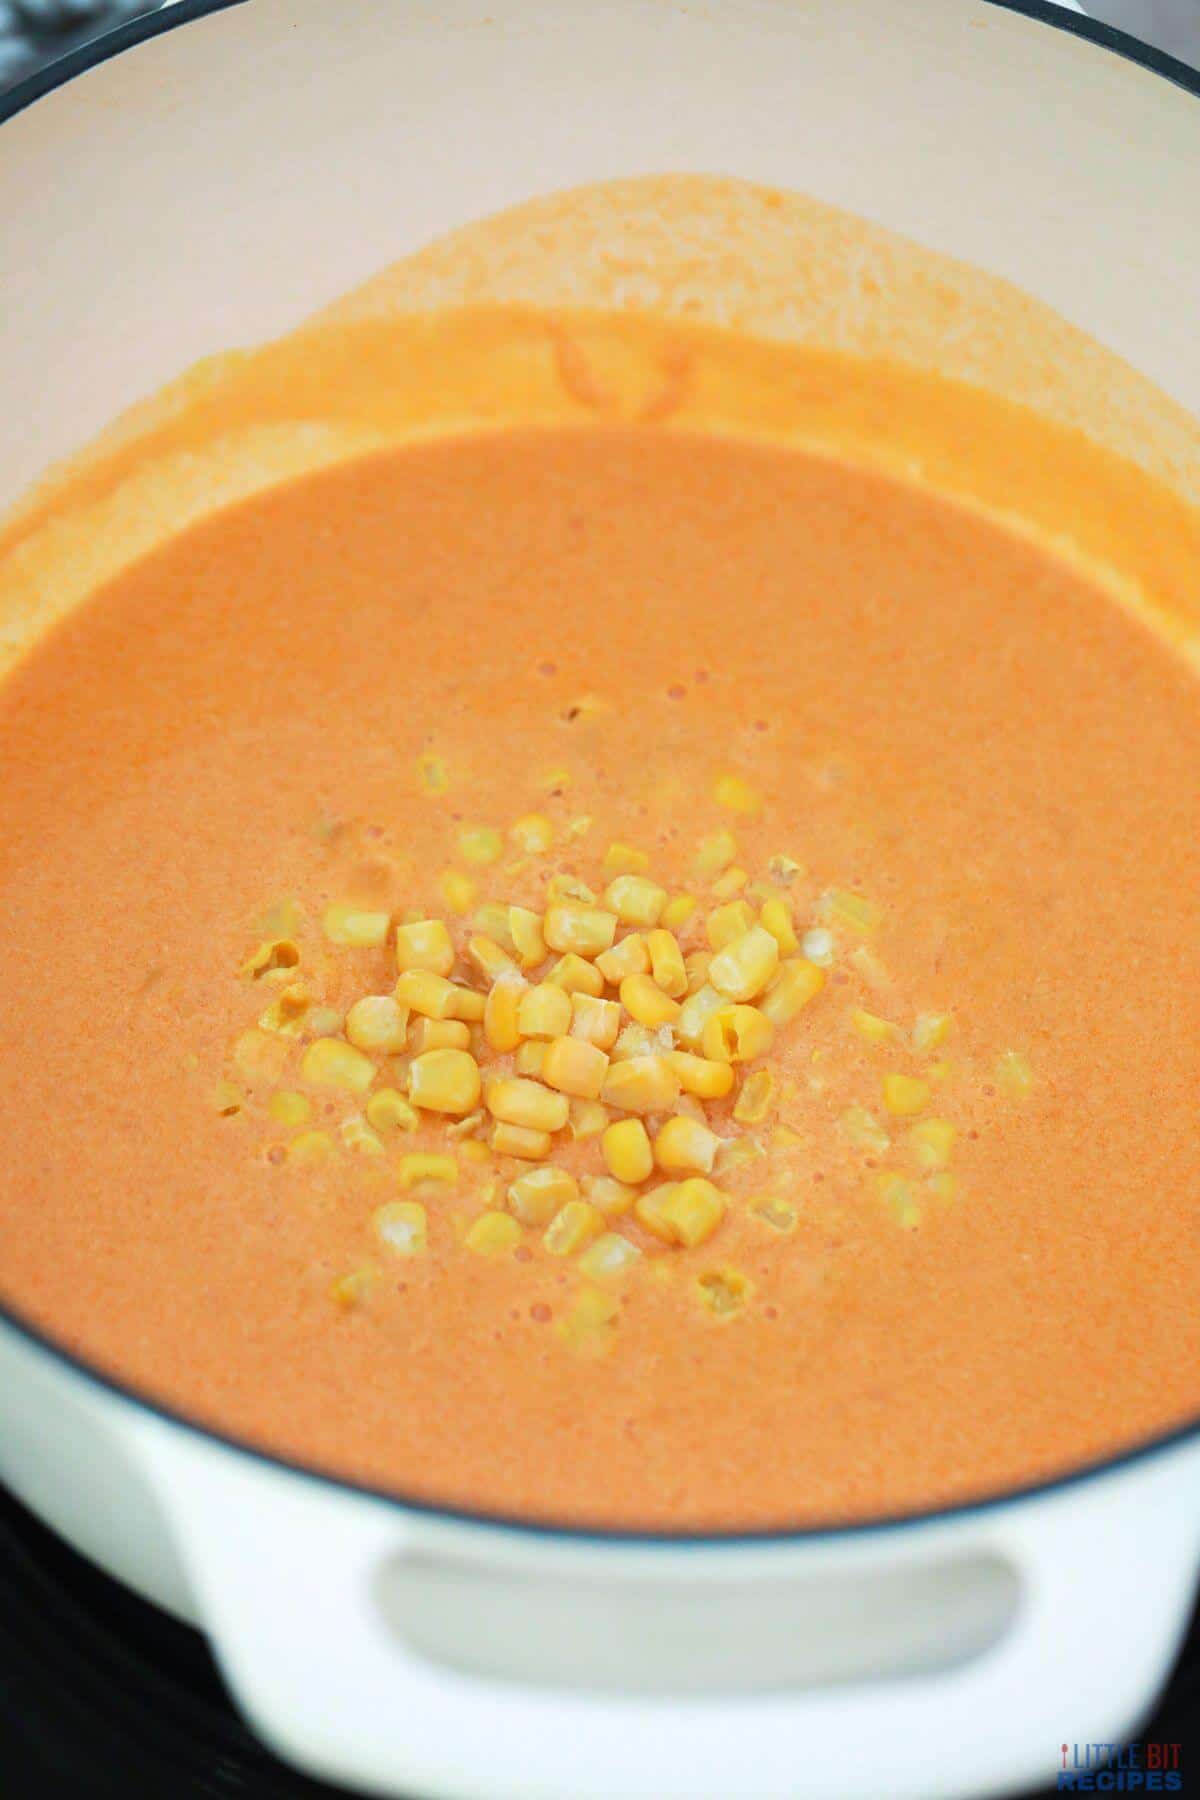 corn added to shrimp bisque.